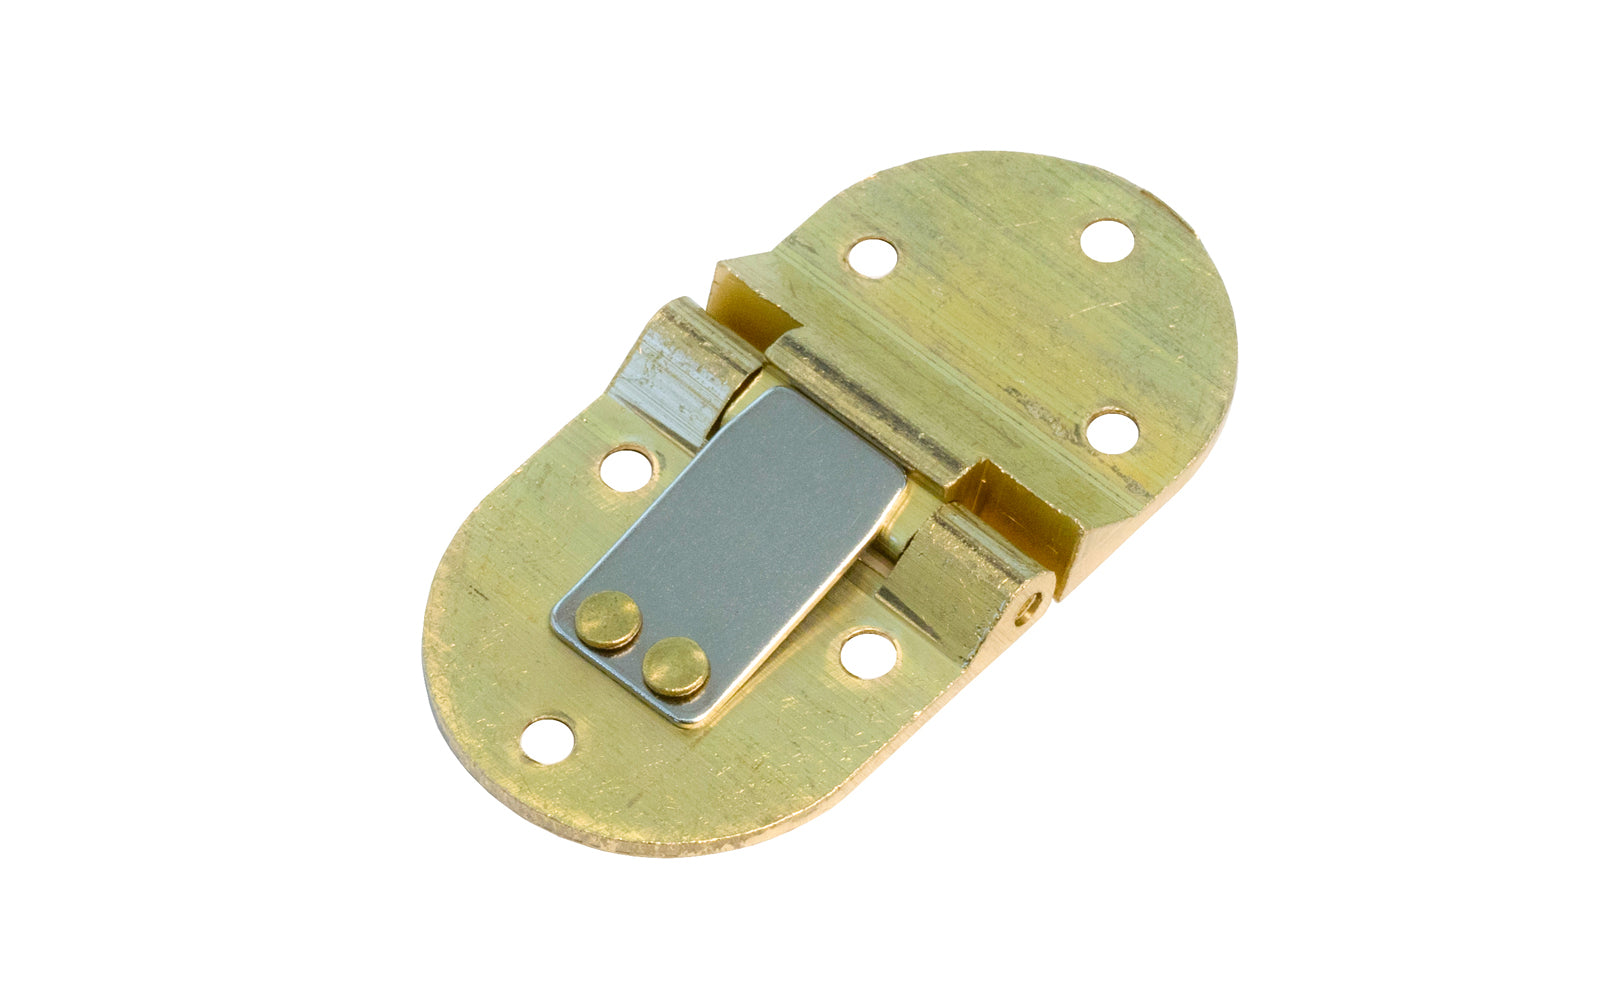 These Solid Brass Butler Tray Hinges have a flush opening, with a positive stop at 90°. High quality hinges made of solid brass material. 2-7/8" x 1-1/2" hinge size. Lacquered Brass Finish. Back side view